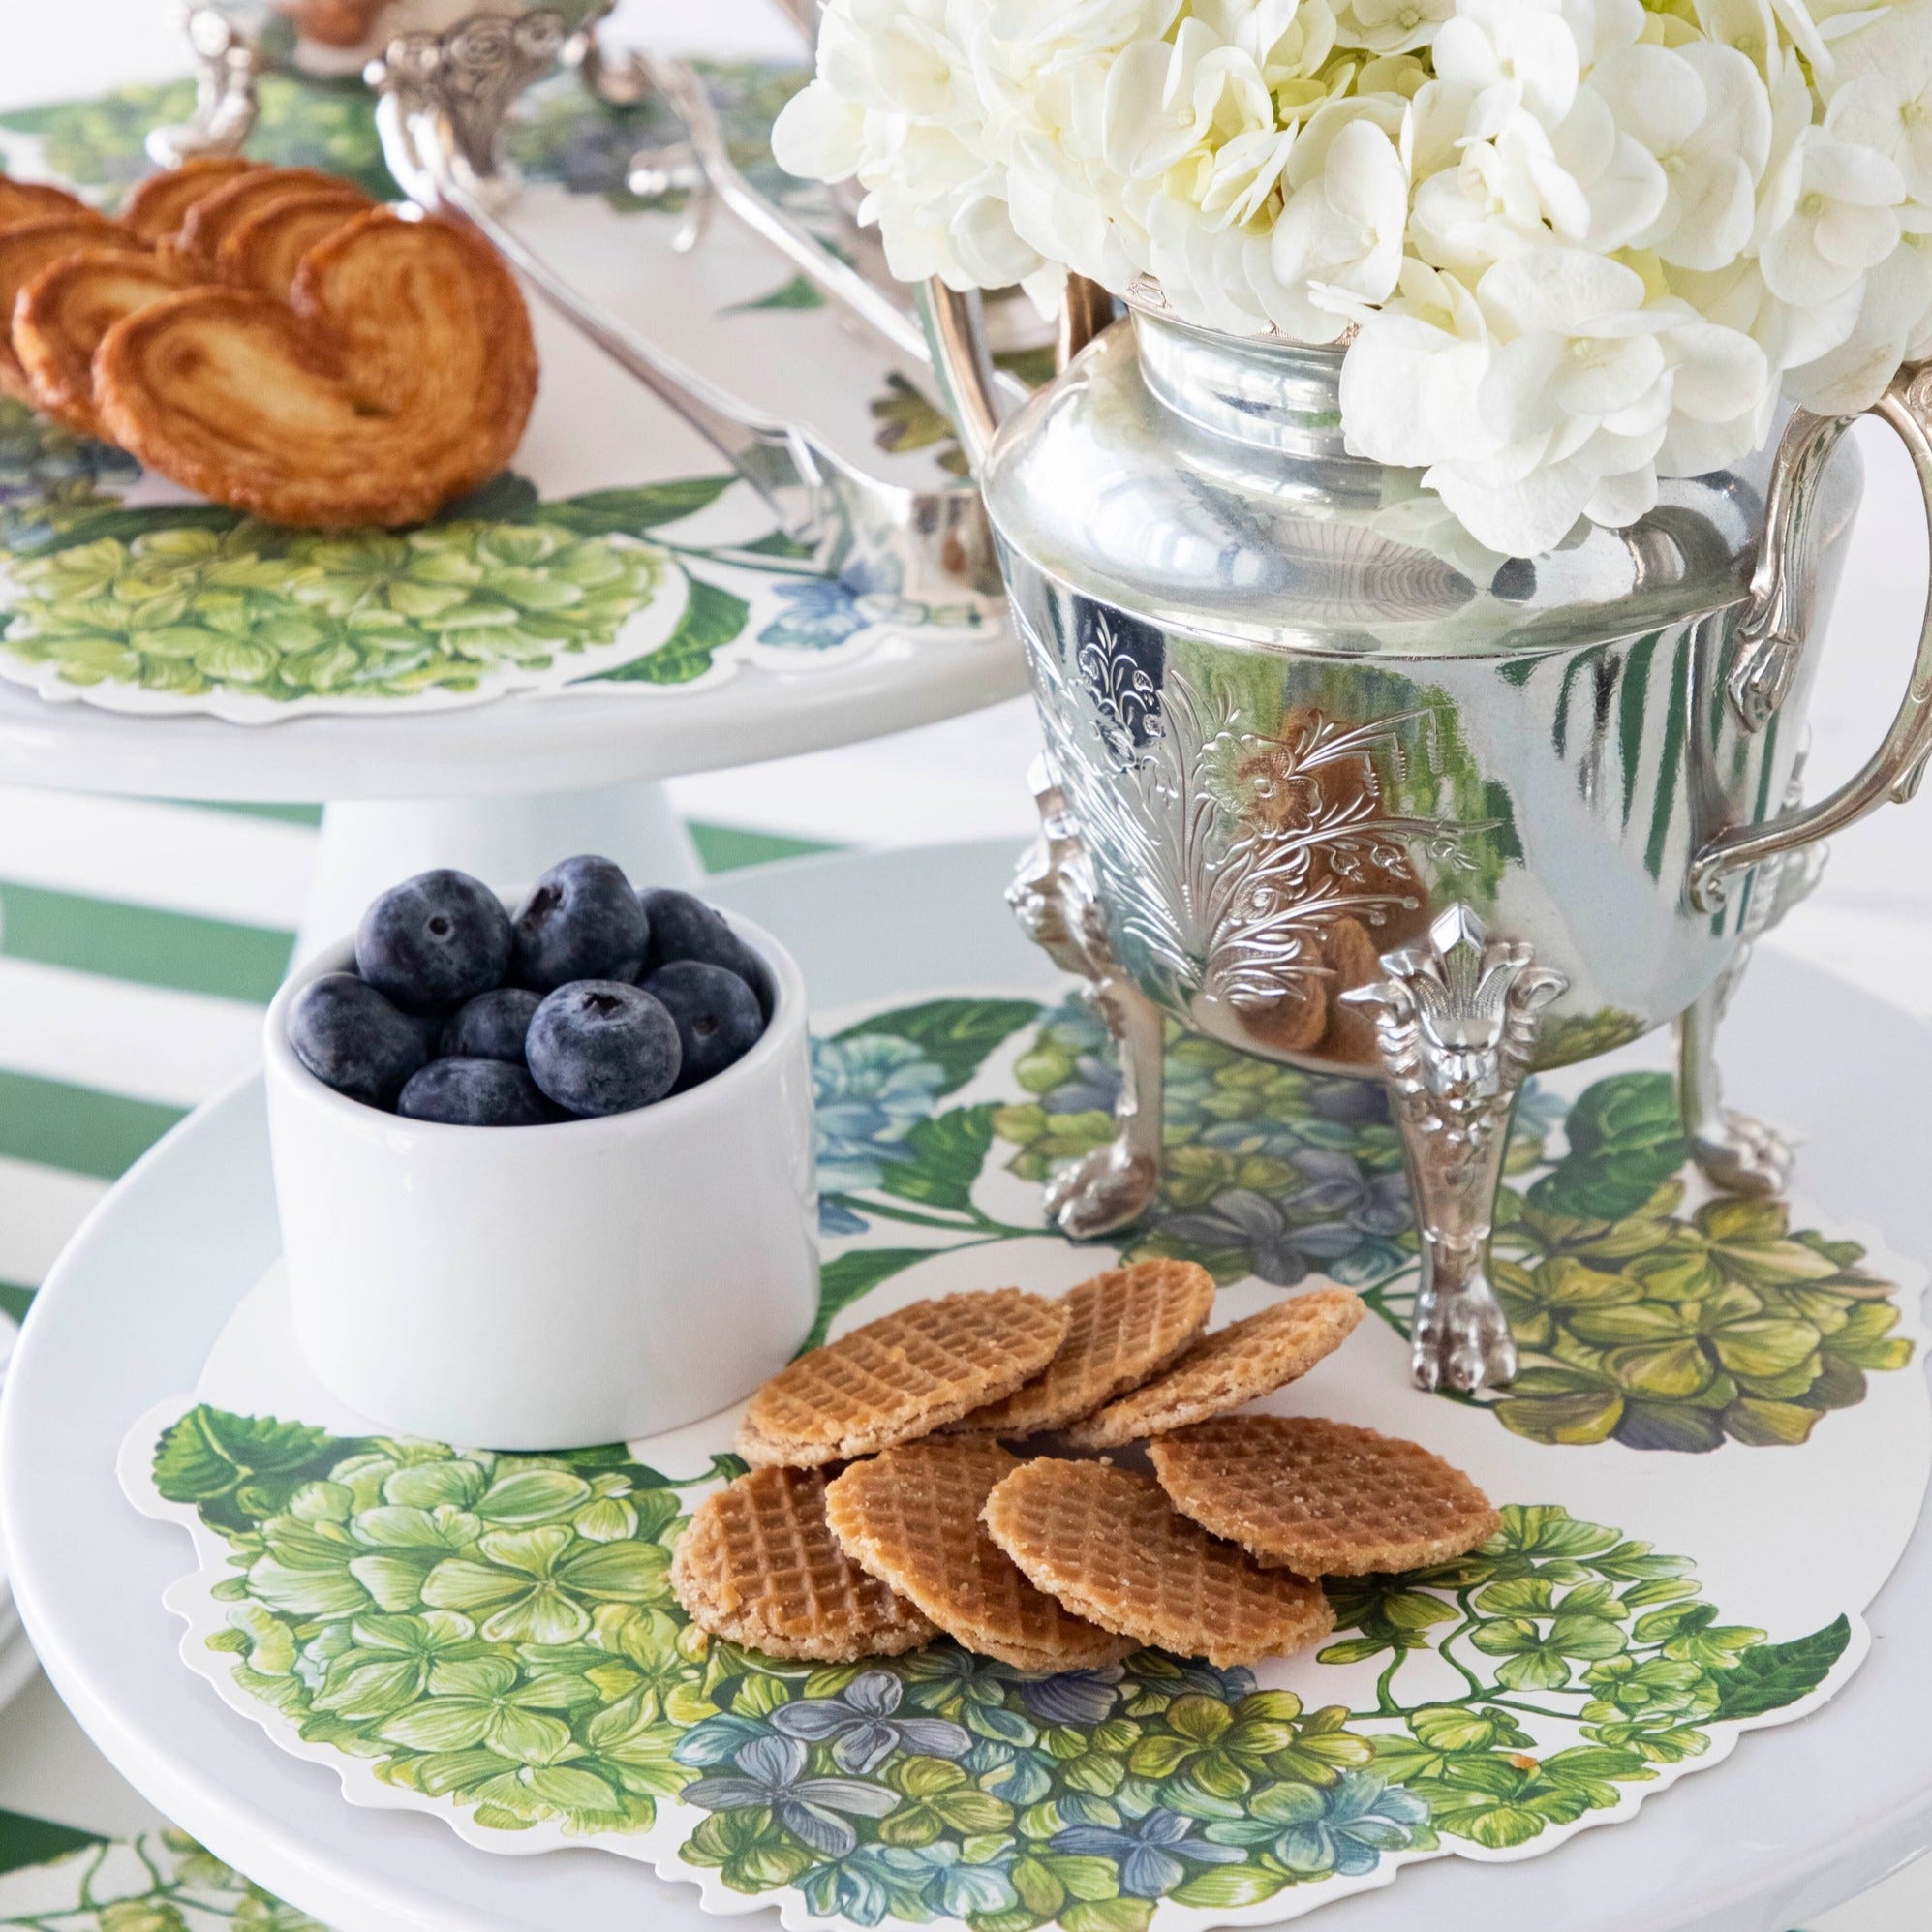 Hydrangea lovers can now display their favorite flowers on beautiful Hester &amp; Cook charcuterie boards or cake stands for a captivating centerpiece. Complete the presentation with Hester &amp; Cook Hydrangea Serving Papers to add elegance and charm.